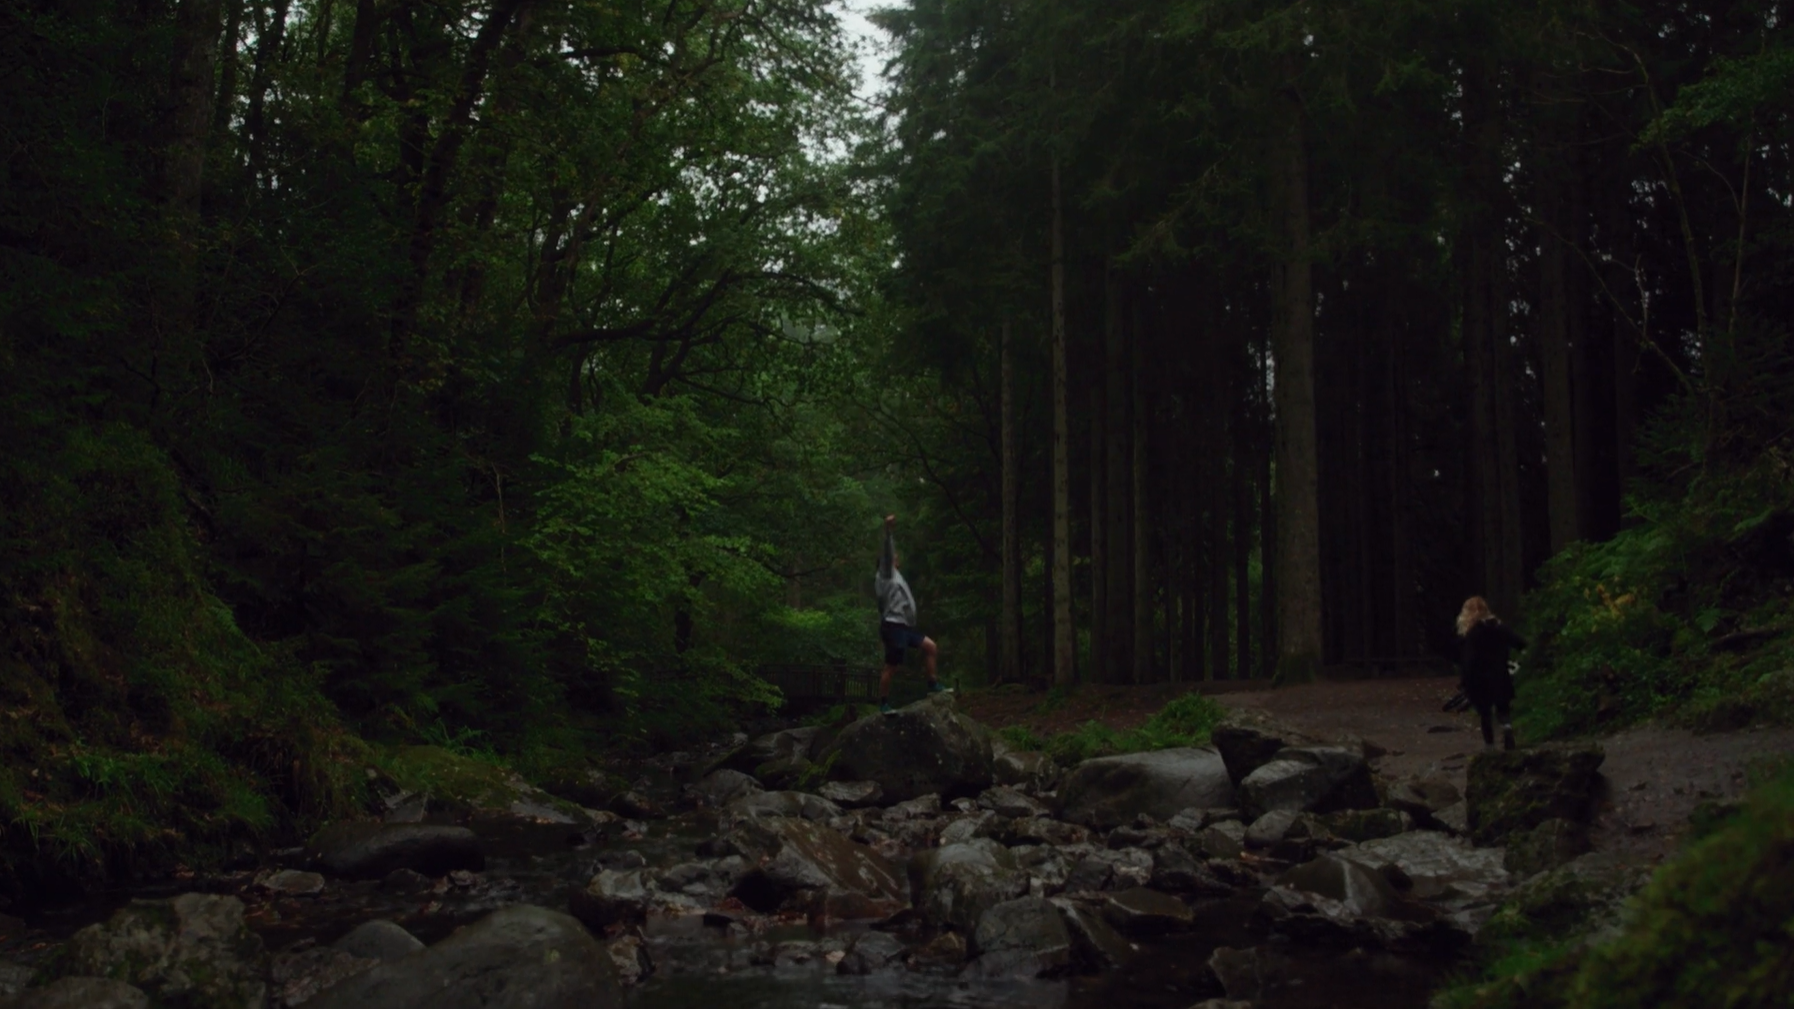 Still image of a forest taken from our film shoot.